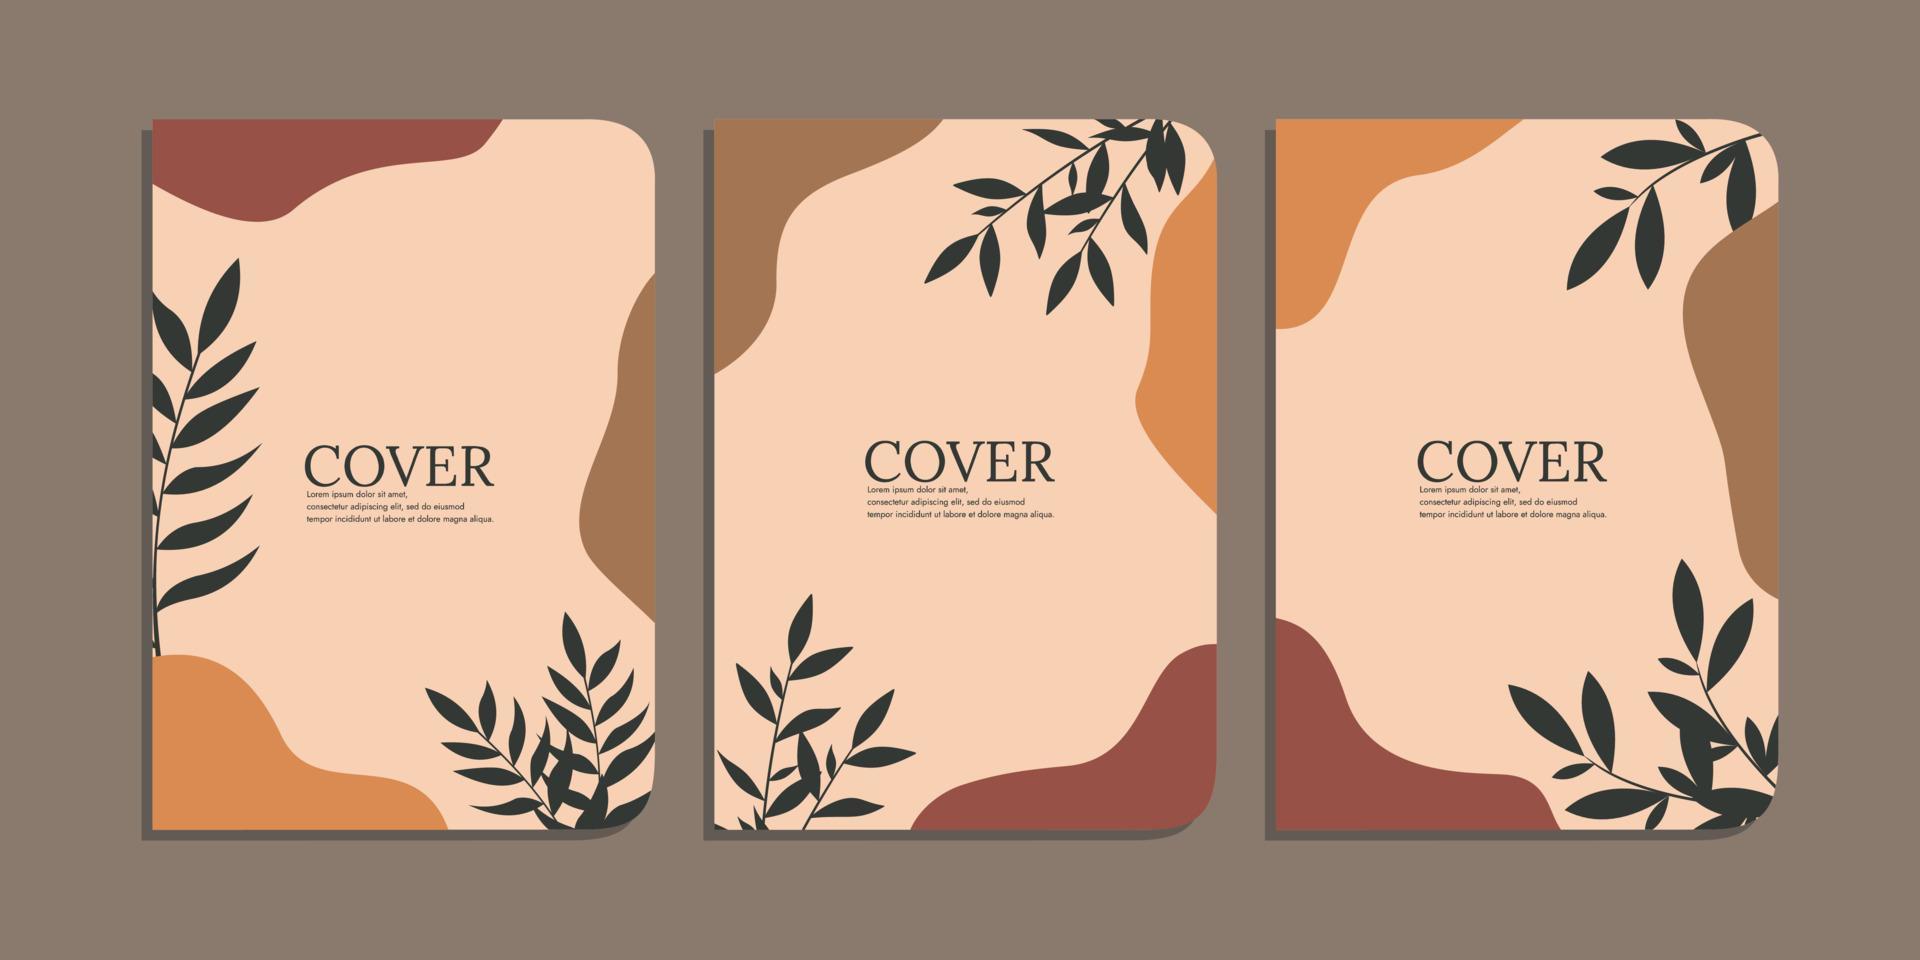 set of book cover designs with hand drawn foliage decorations. abstract retro botanical background.size A4 For notebooks, diary, schoolbook, planners, brochures, books, catalogs vector